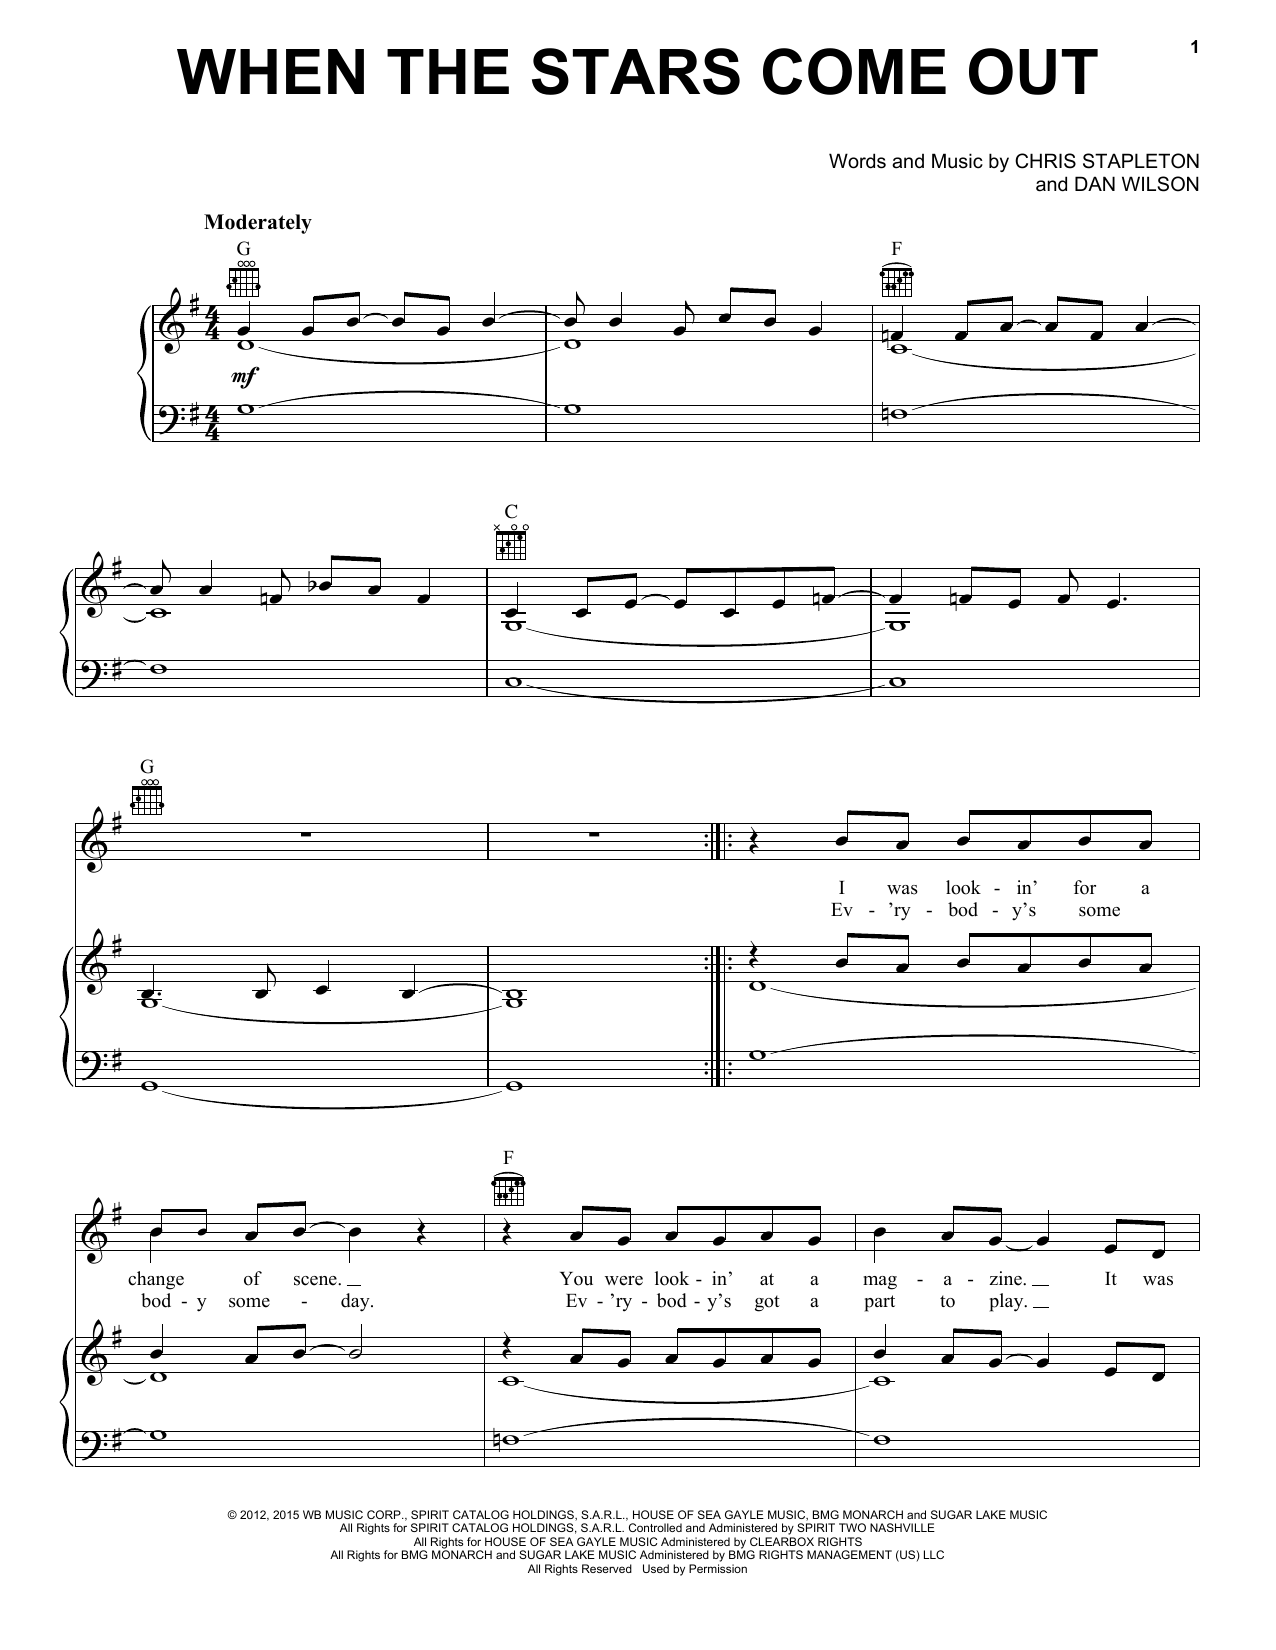 Download Chris Stapleton When The Stars Come Out Sheet Music